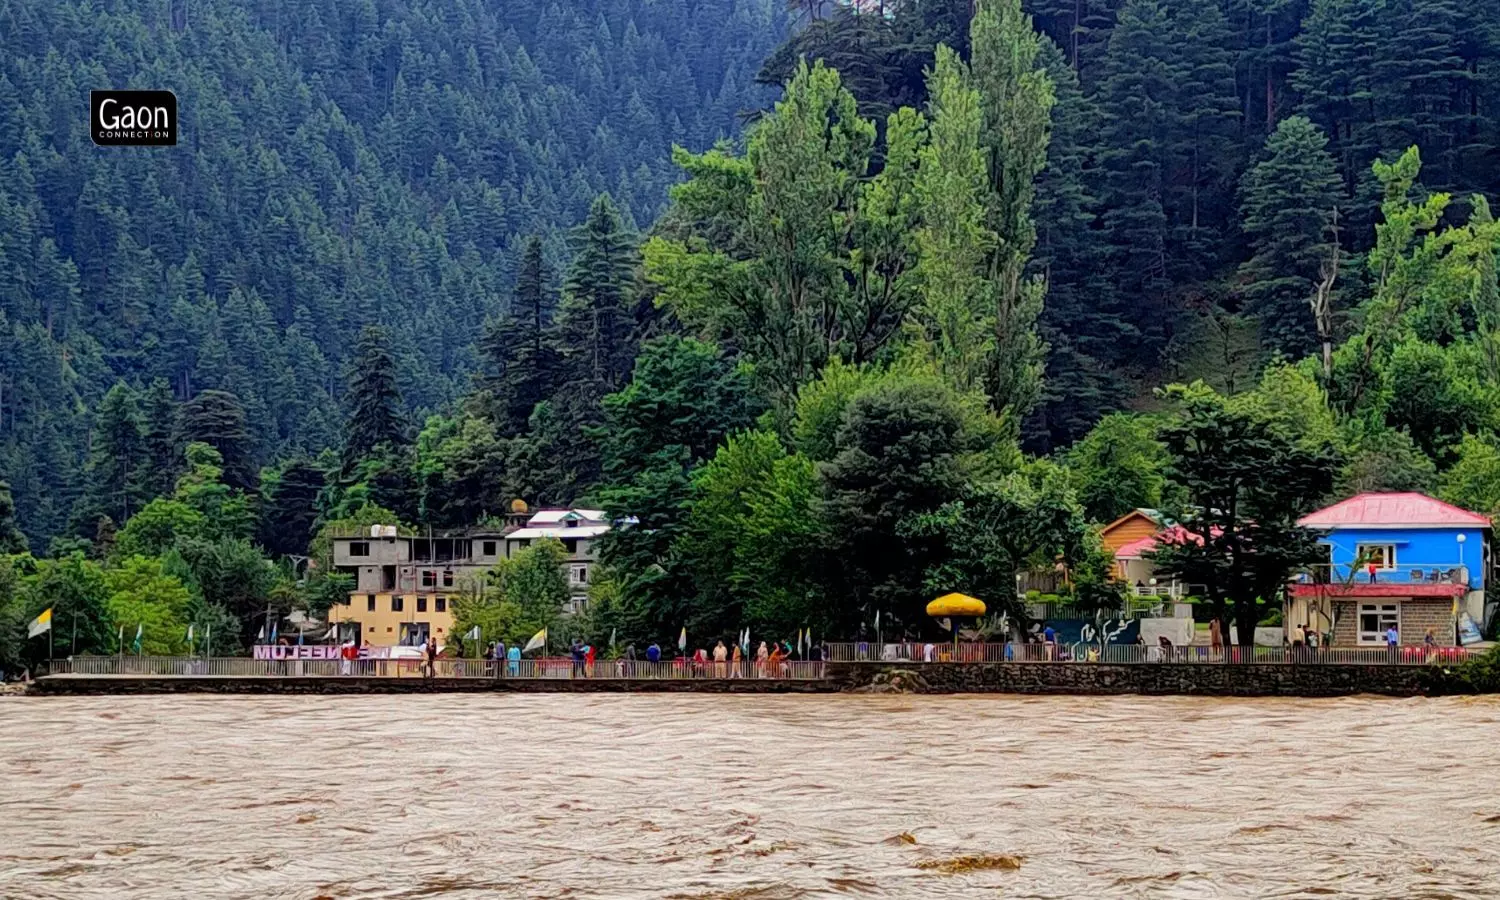 A village in the LoC becomes tourist-friendly